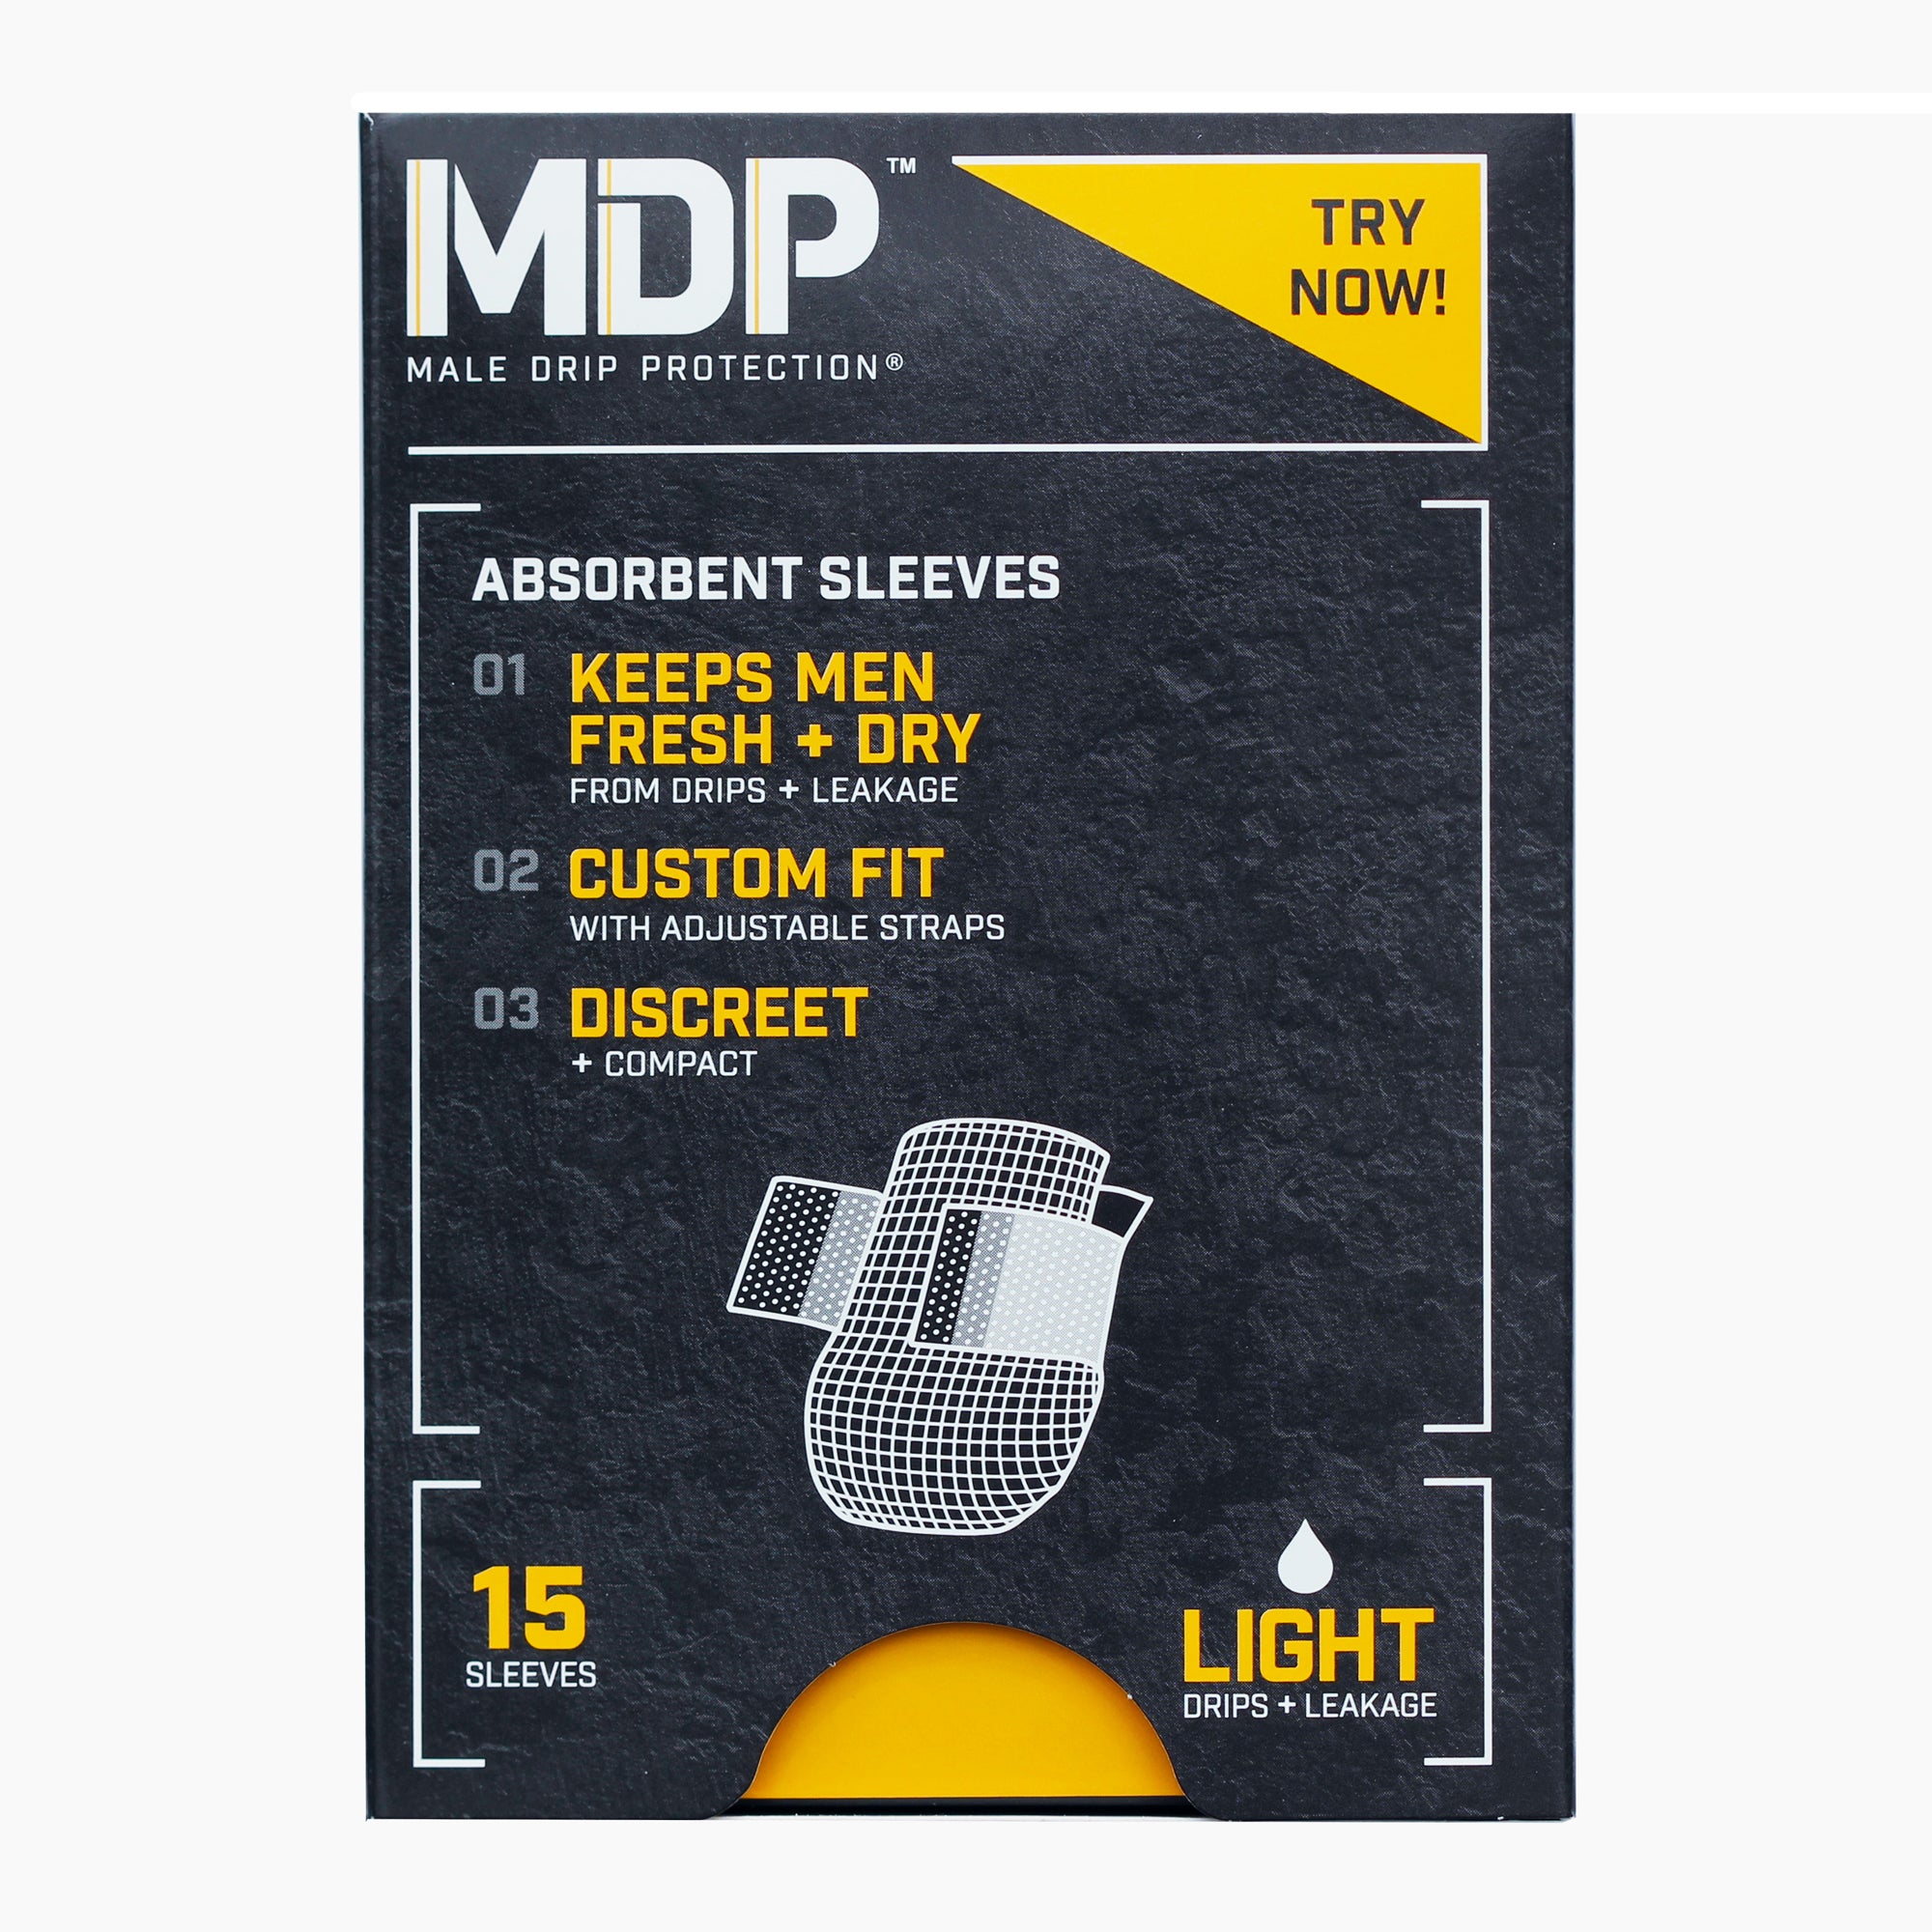 MDP - Male Drip Protection